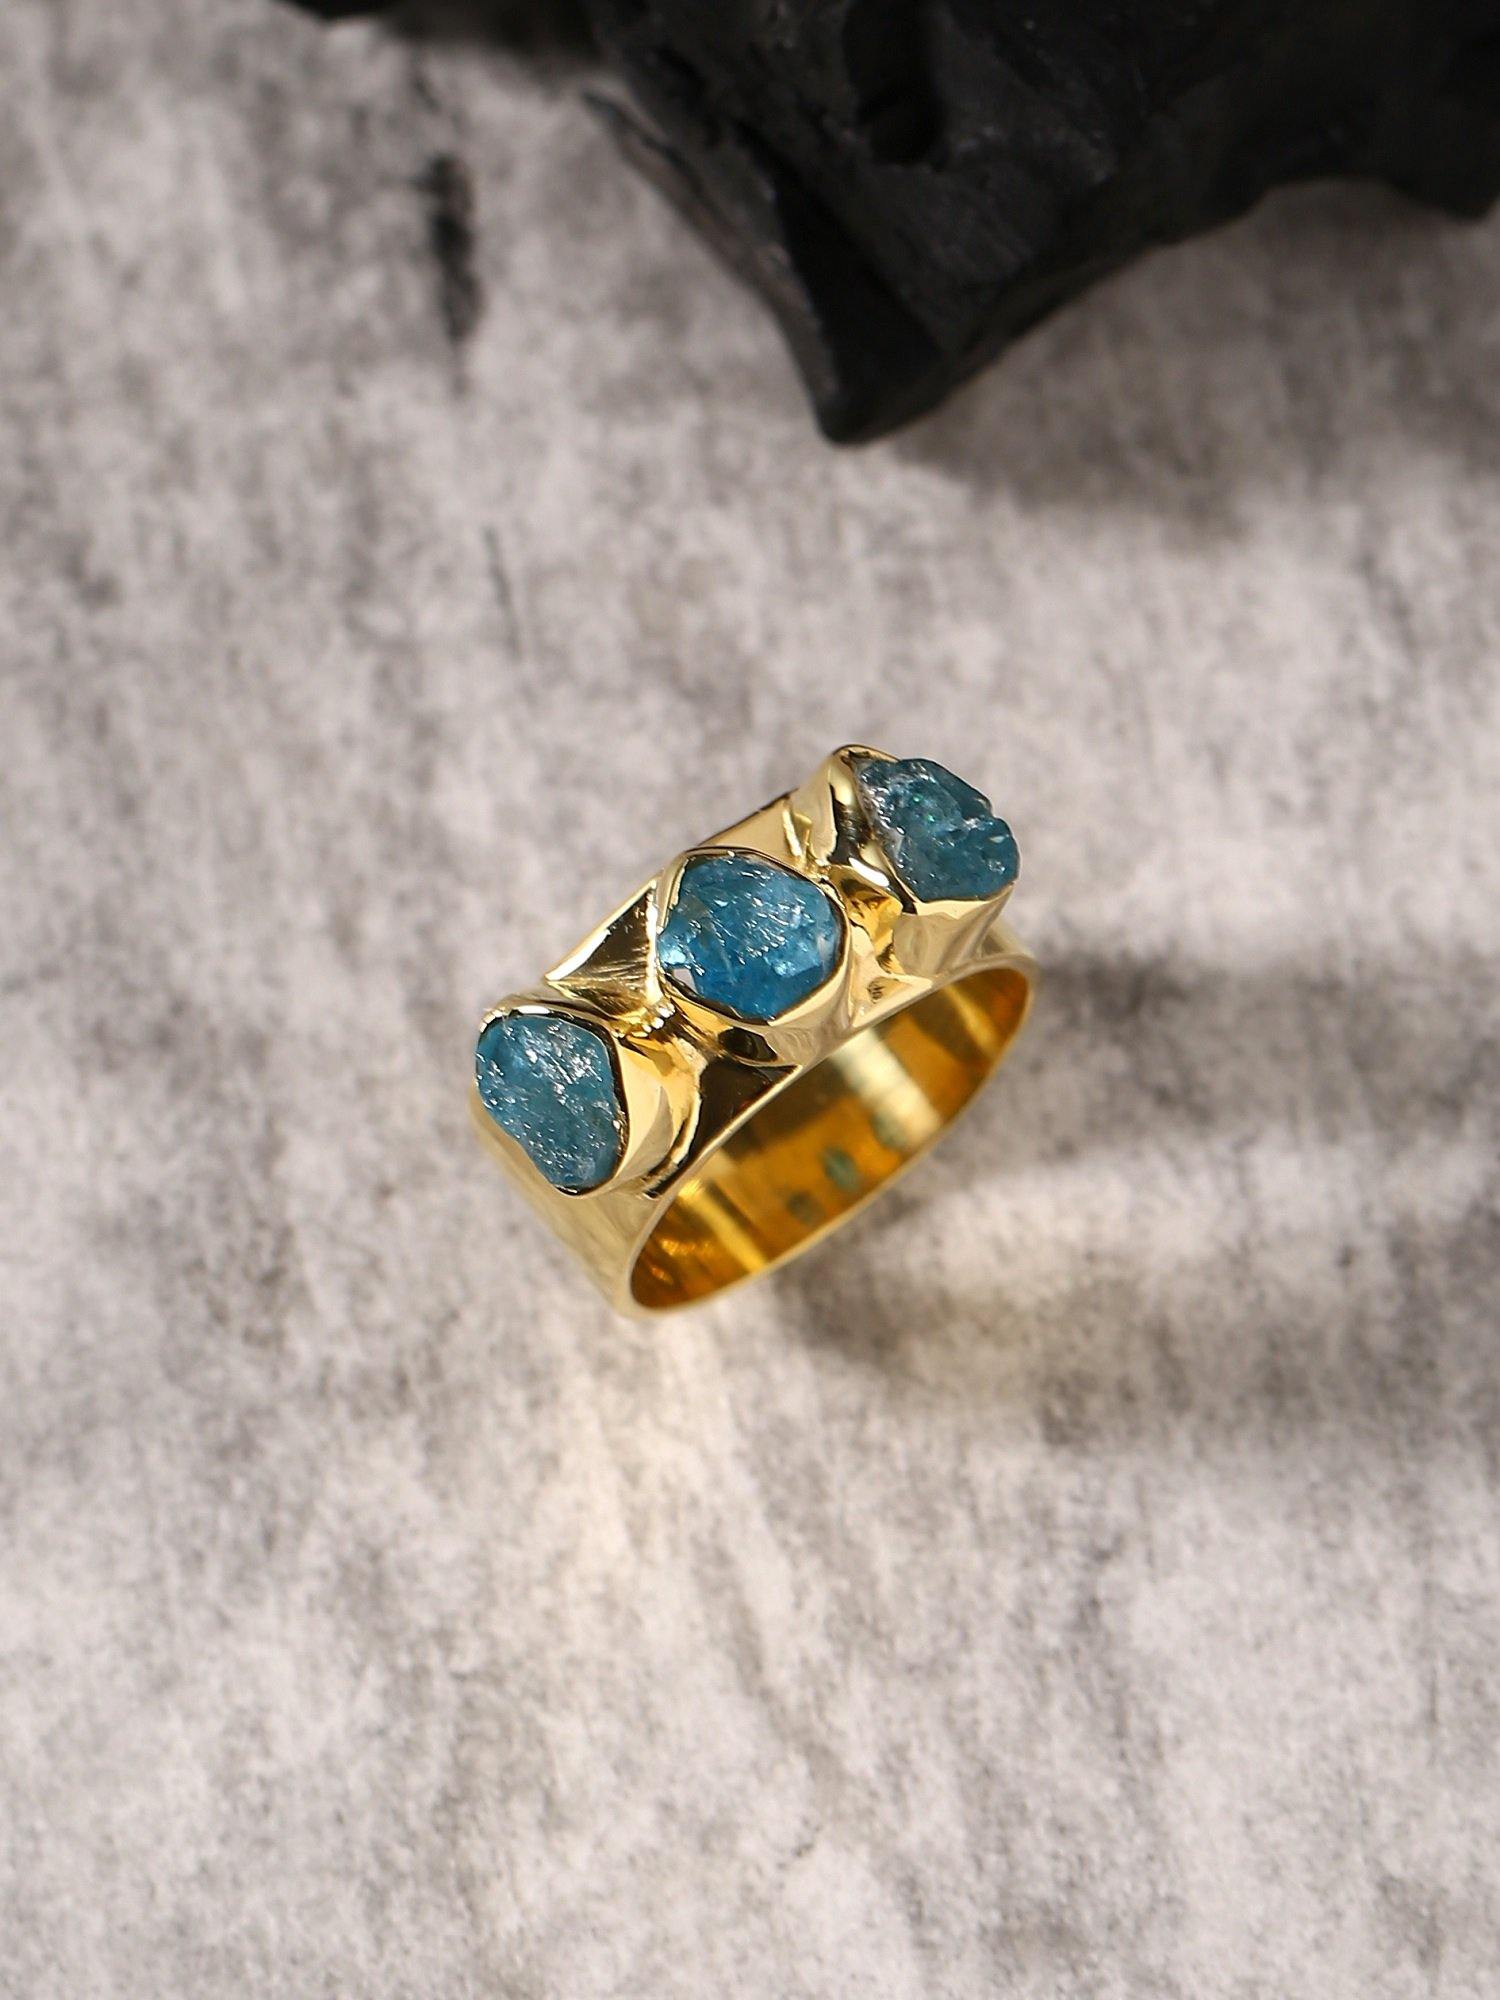 Rough Neon Apatite Solid 925 Sterling Silver Gold Plated Ring Jewelry - YoTreasure